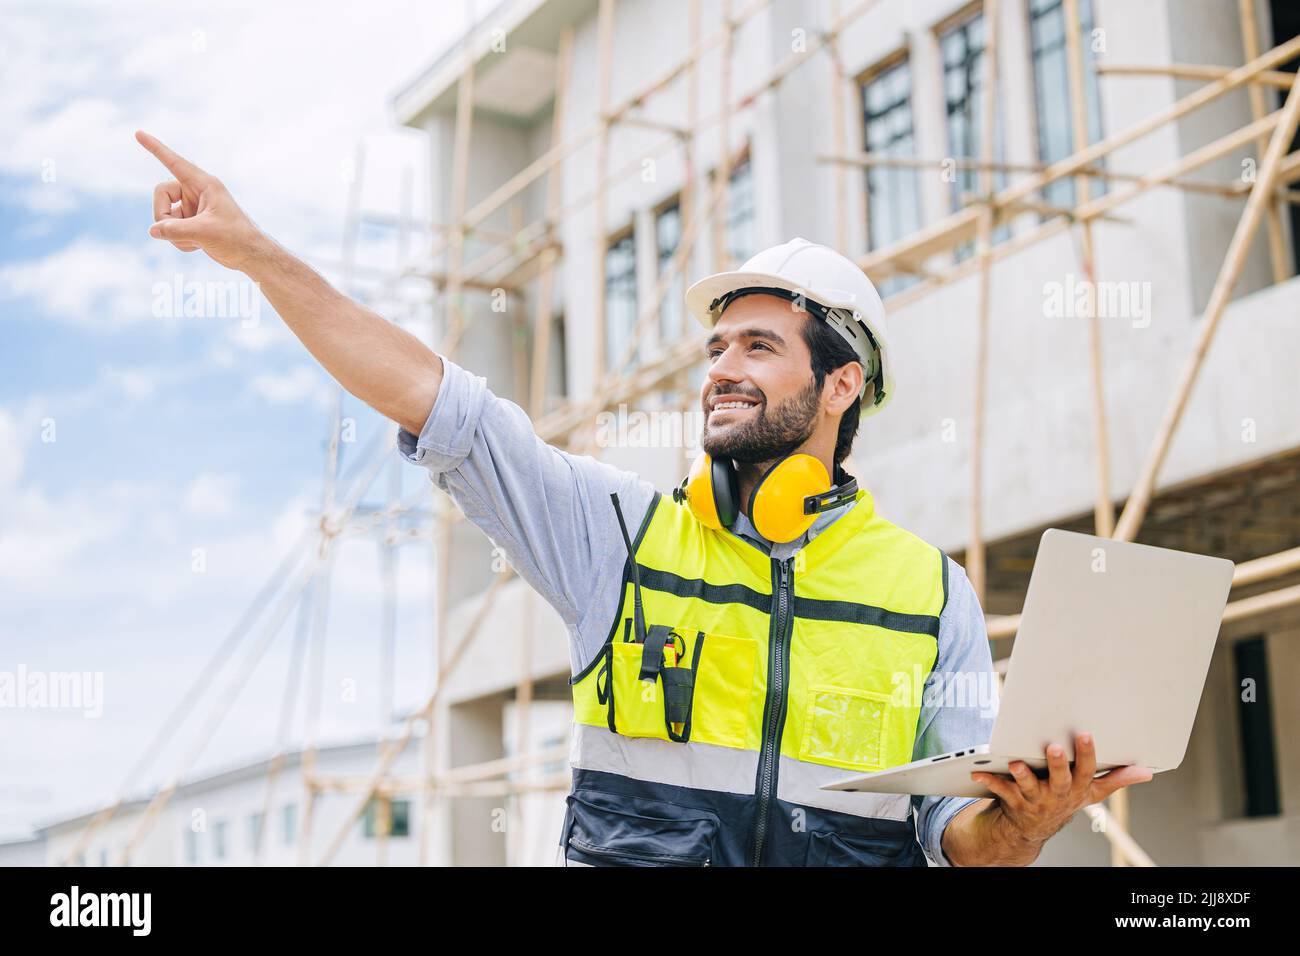 Success Engineer smart builder. Happy Foreman work in construction site. Architect home project designer leader concept. Stock Photo